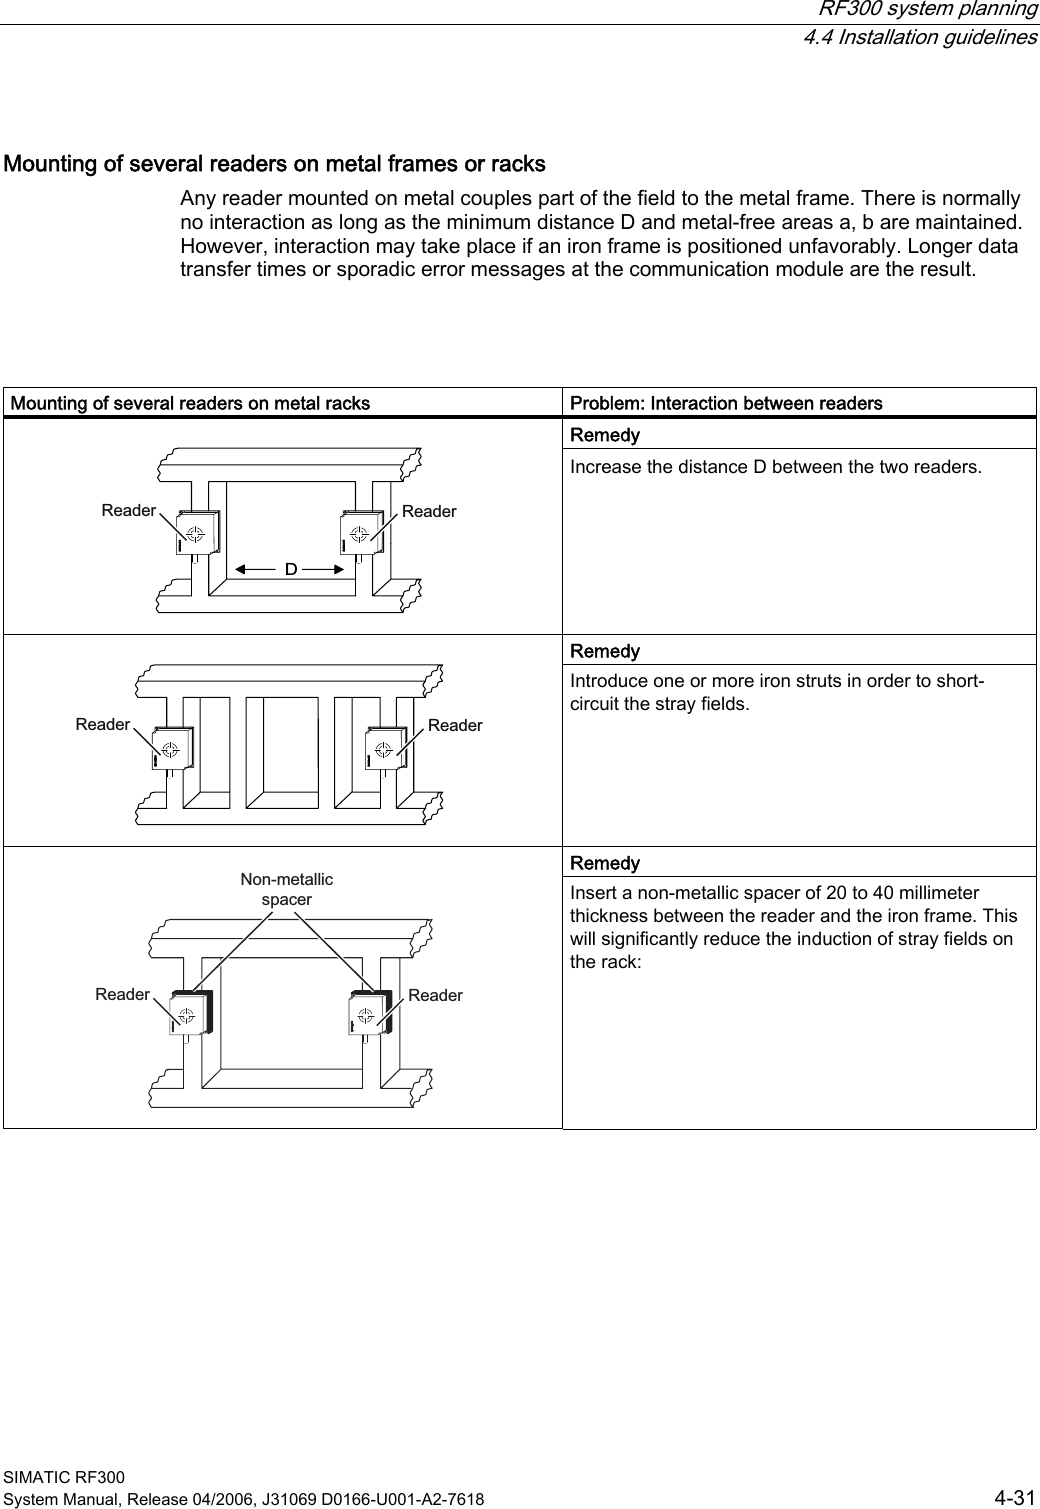  RF300 system planning  4.4 Installation guidelines SIMATIC RF300 System Manual, Release 04/2006, J31069 D0166-U001-A2-7618  4-31 Mounting of several readers on metal frames or racks Any reader mounted on metal couples part of the field to the metal frame. There is normally no interaction as long as the minimum distance D and metal-free areas a, b are maintained. However, interaction may take place if an iron frame is positioned unfavorably. Longer data transfer times or sporadic error messages at the communication module are the result.   Mounting of several readers on metal racks  Problem: Interaction between readers Remedy  &apos;5HDGHU 5HDGHU  Increase the distance D between the two readers. Remedy  5HDGHU 5HDGHU  Introduce one or more iron struts in order to short-circuit the stray fields. Remedy  1RQPHWDOOLFVSDFHU5HDGHU 5HDGHU  Insert a non-metallic spacer of 20 to 40 millimeter thickness between the reader and the iron frame. This will significantly reduce the induction of stray fields on the rack:   